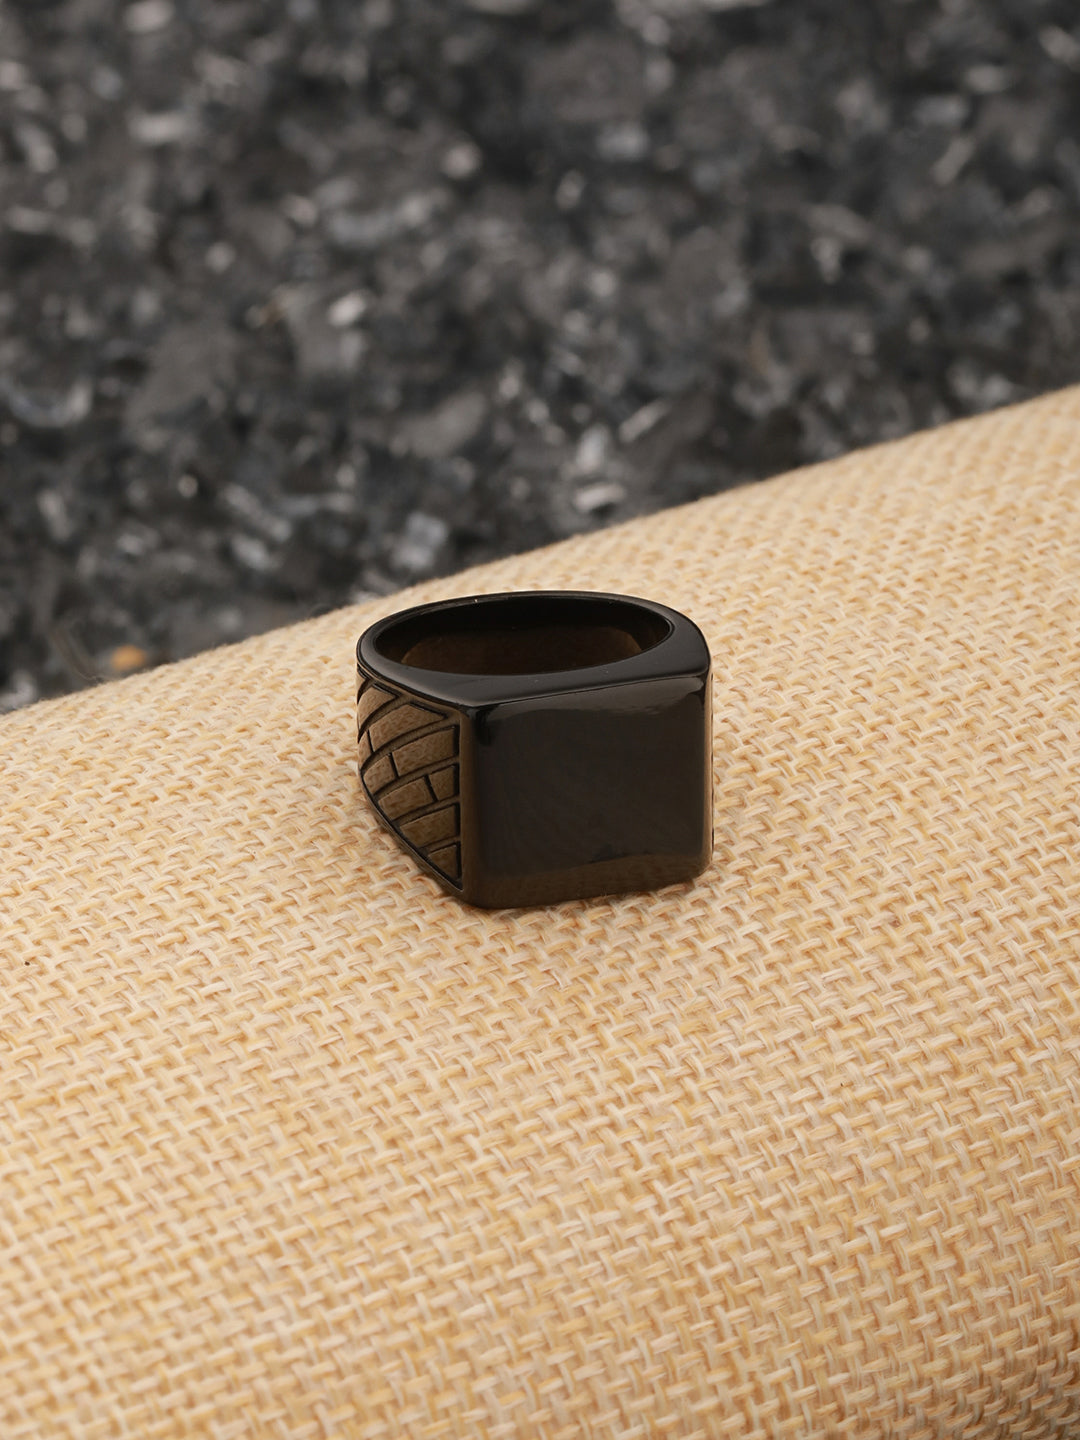 Jazz And Sizzle Men Black Stainless Steel Band Finger Ring - Jazzandsizzle